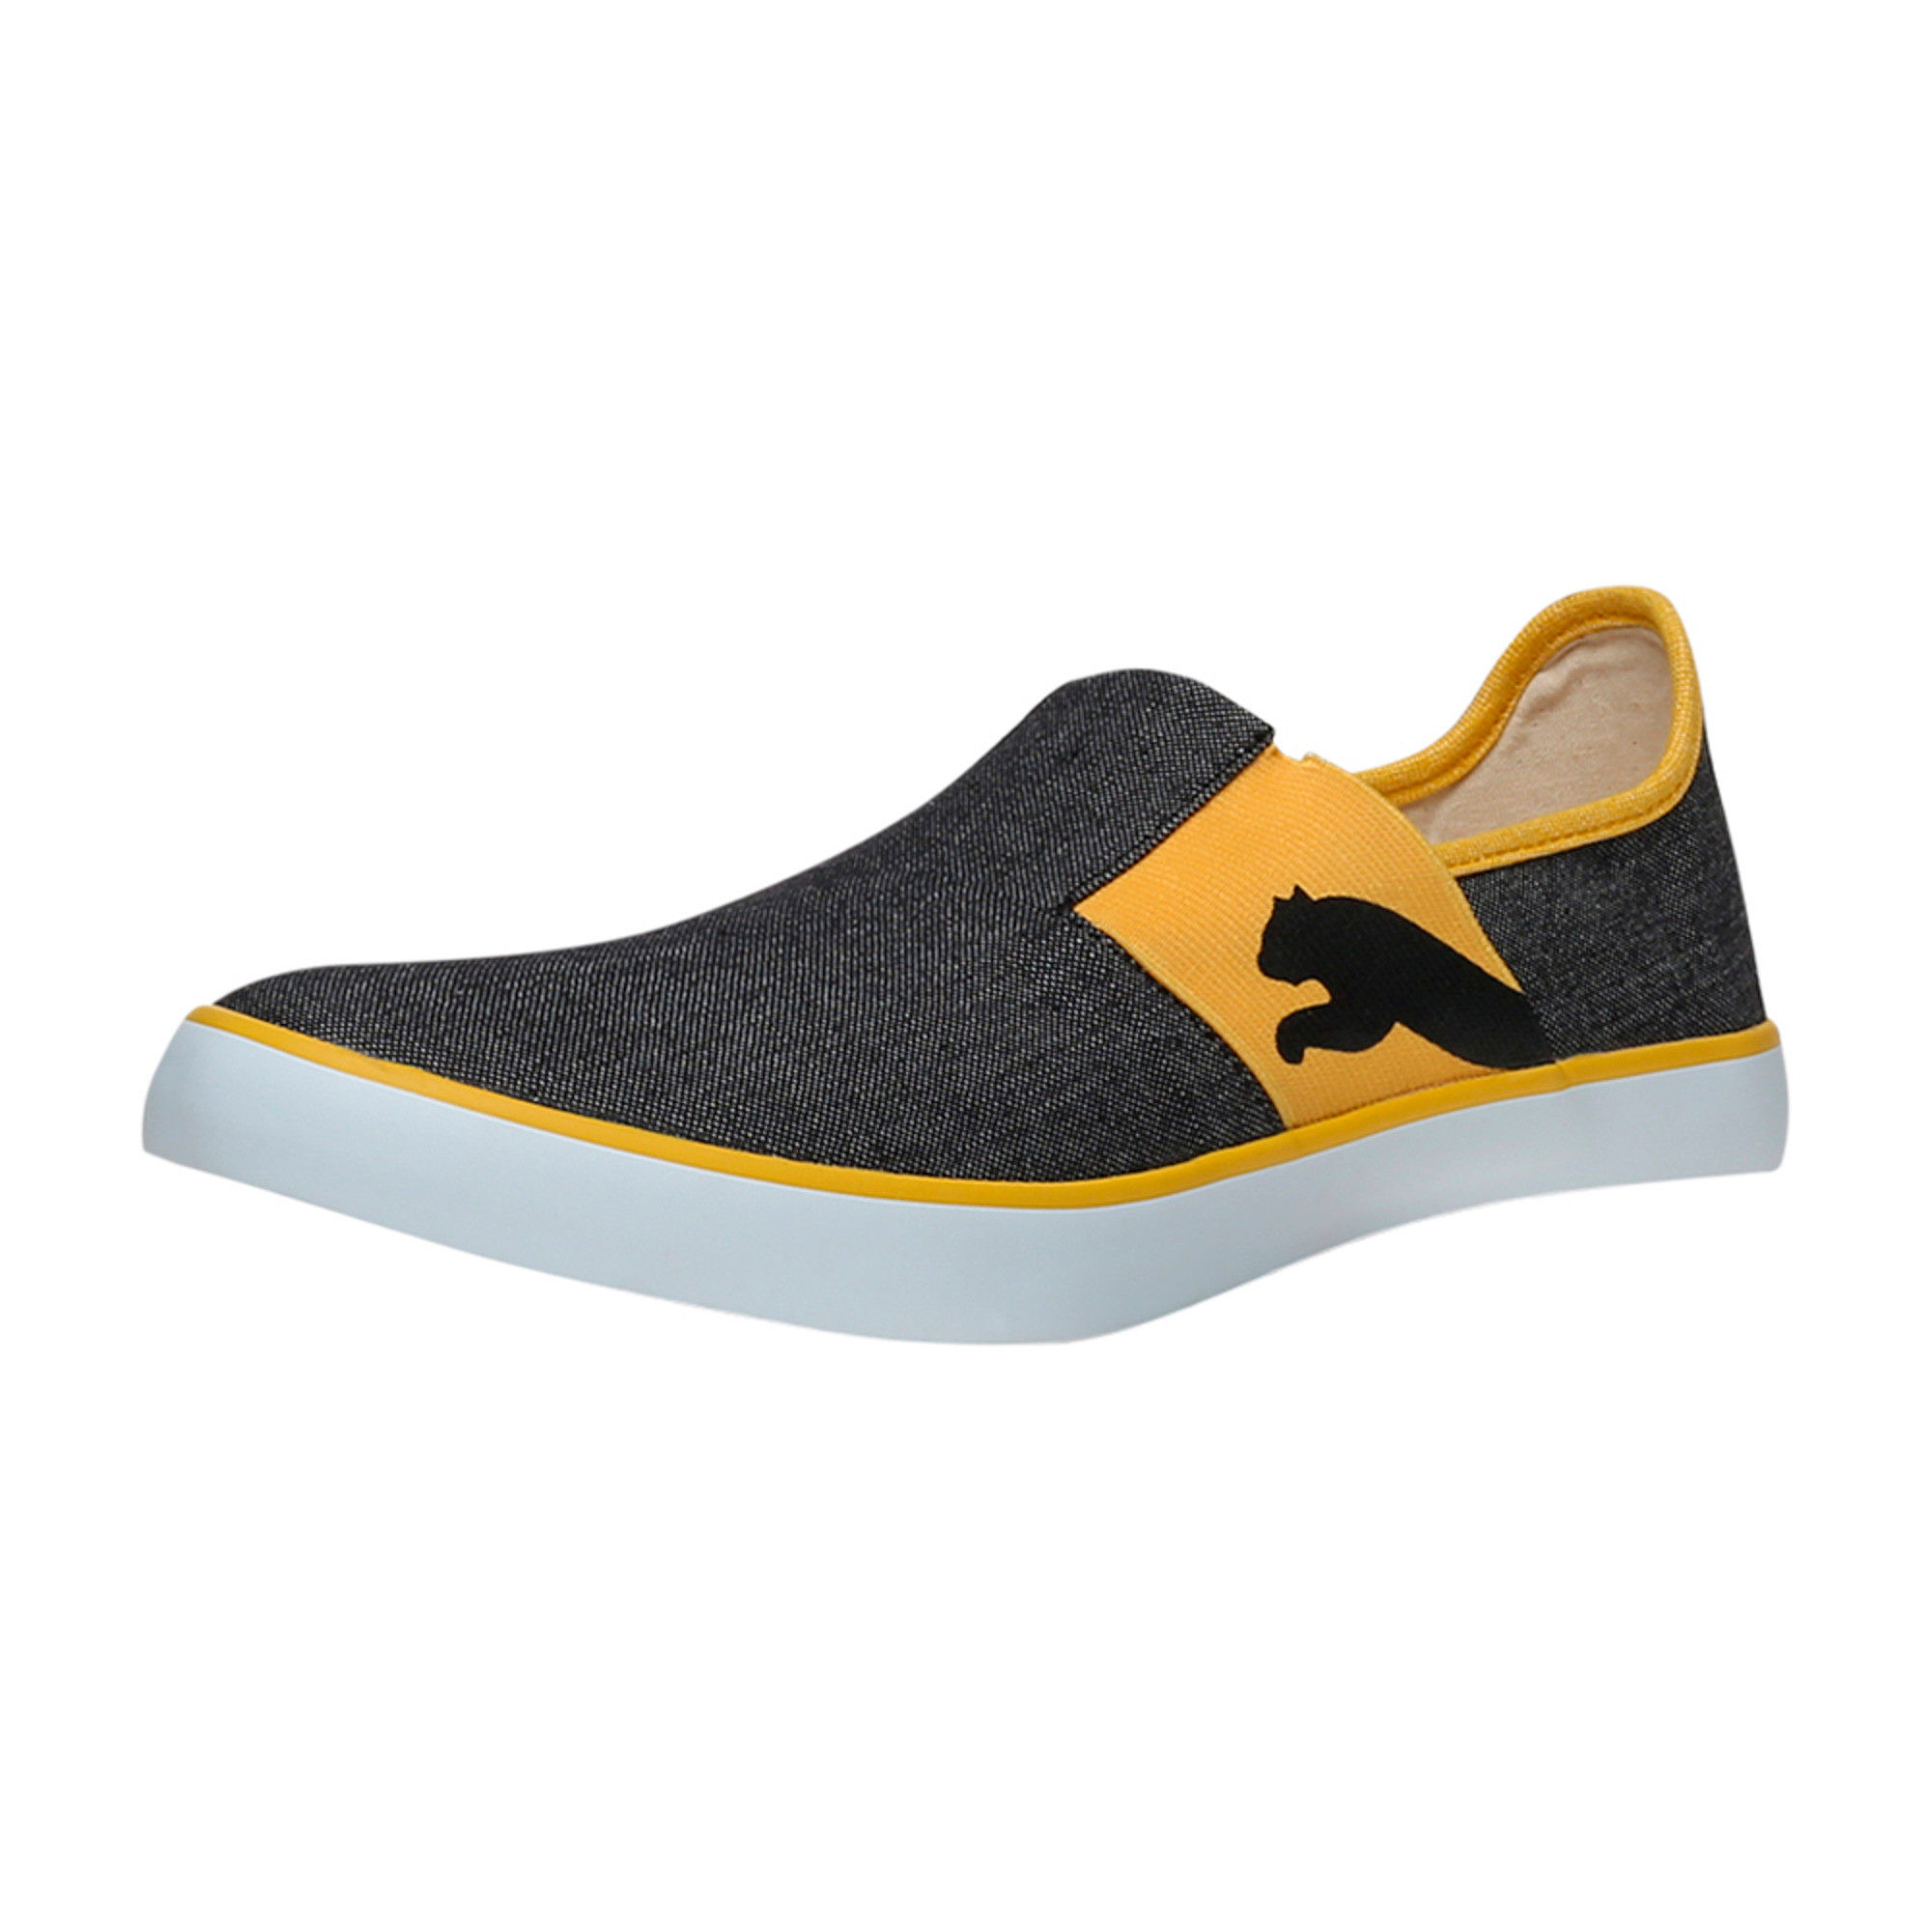 Buy Puma Men's Lazy Slip On GU IDP True Blue and Barbados Cherry Sneakers  Online at Low Prices in India - Paytmmall.com